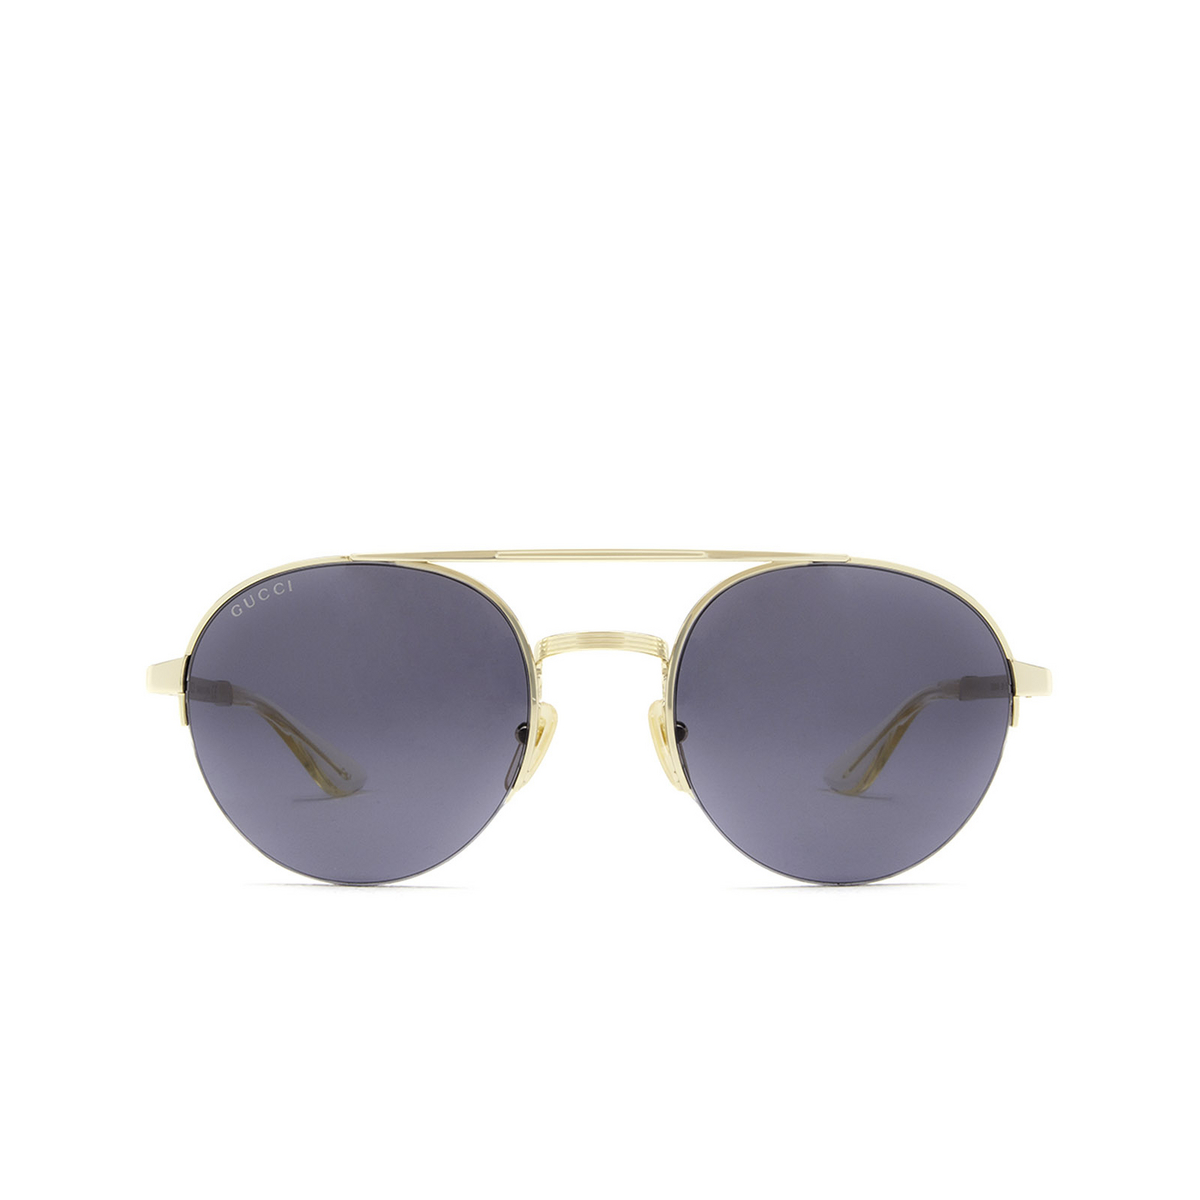 Gucci® Round Sunglasses: GG0984S color Gold 001 - front view.